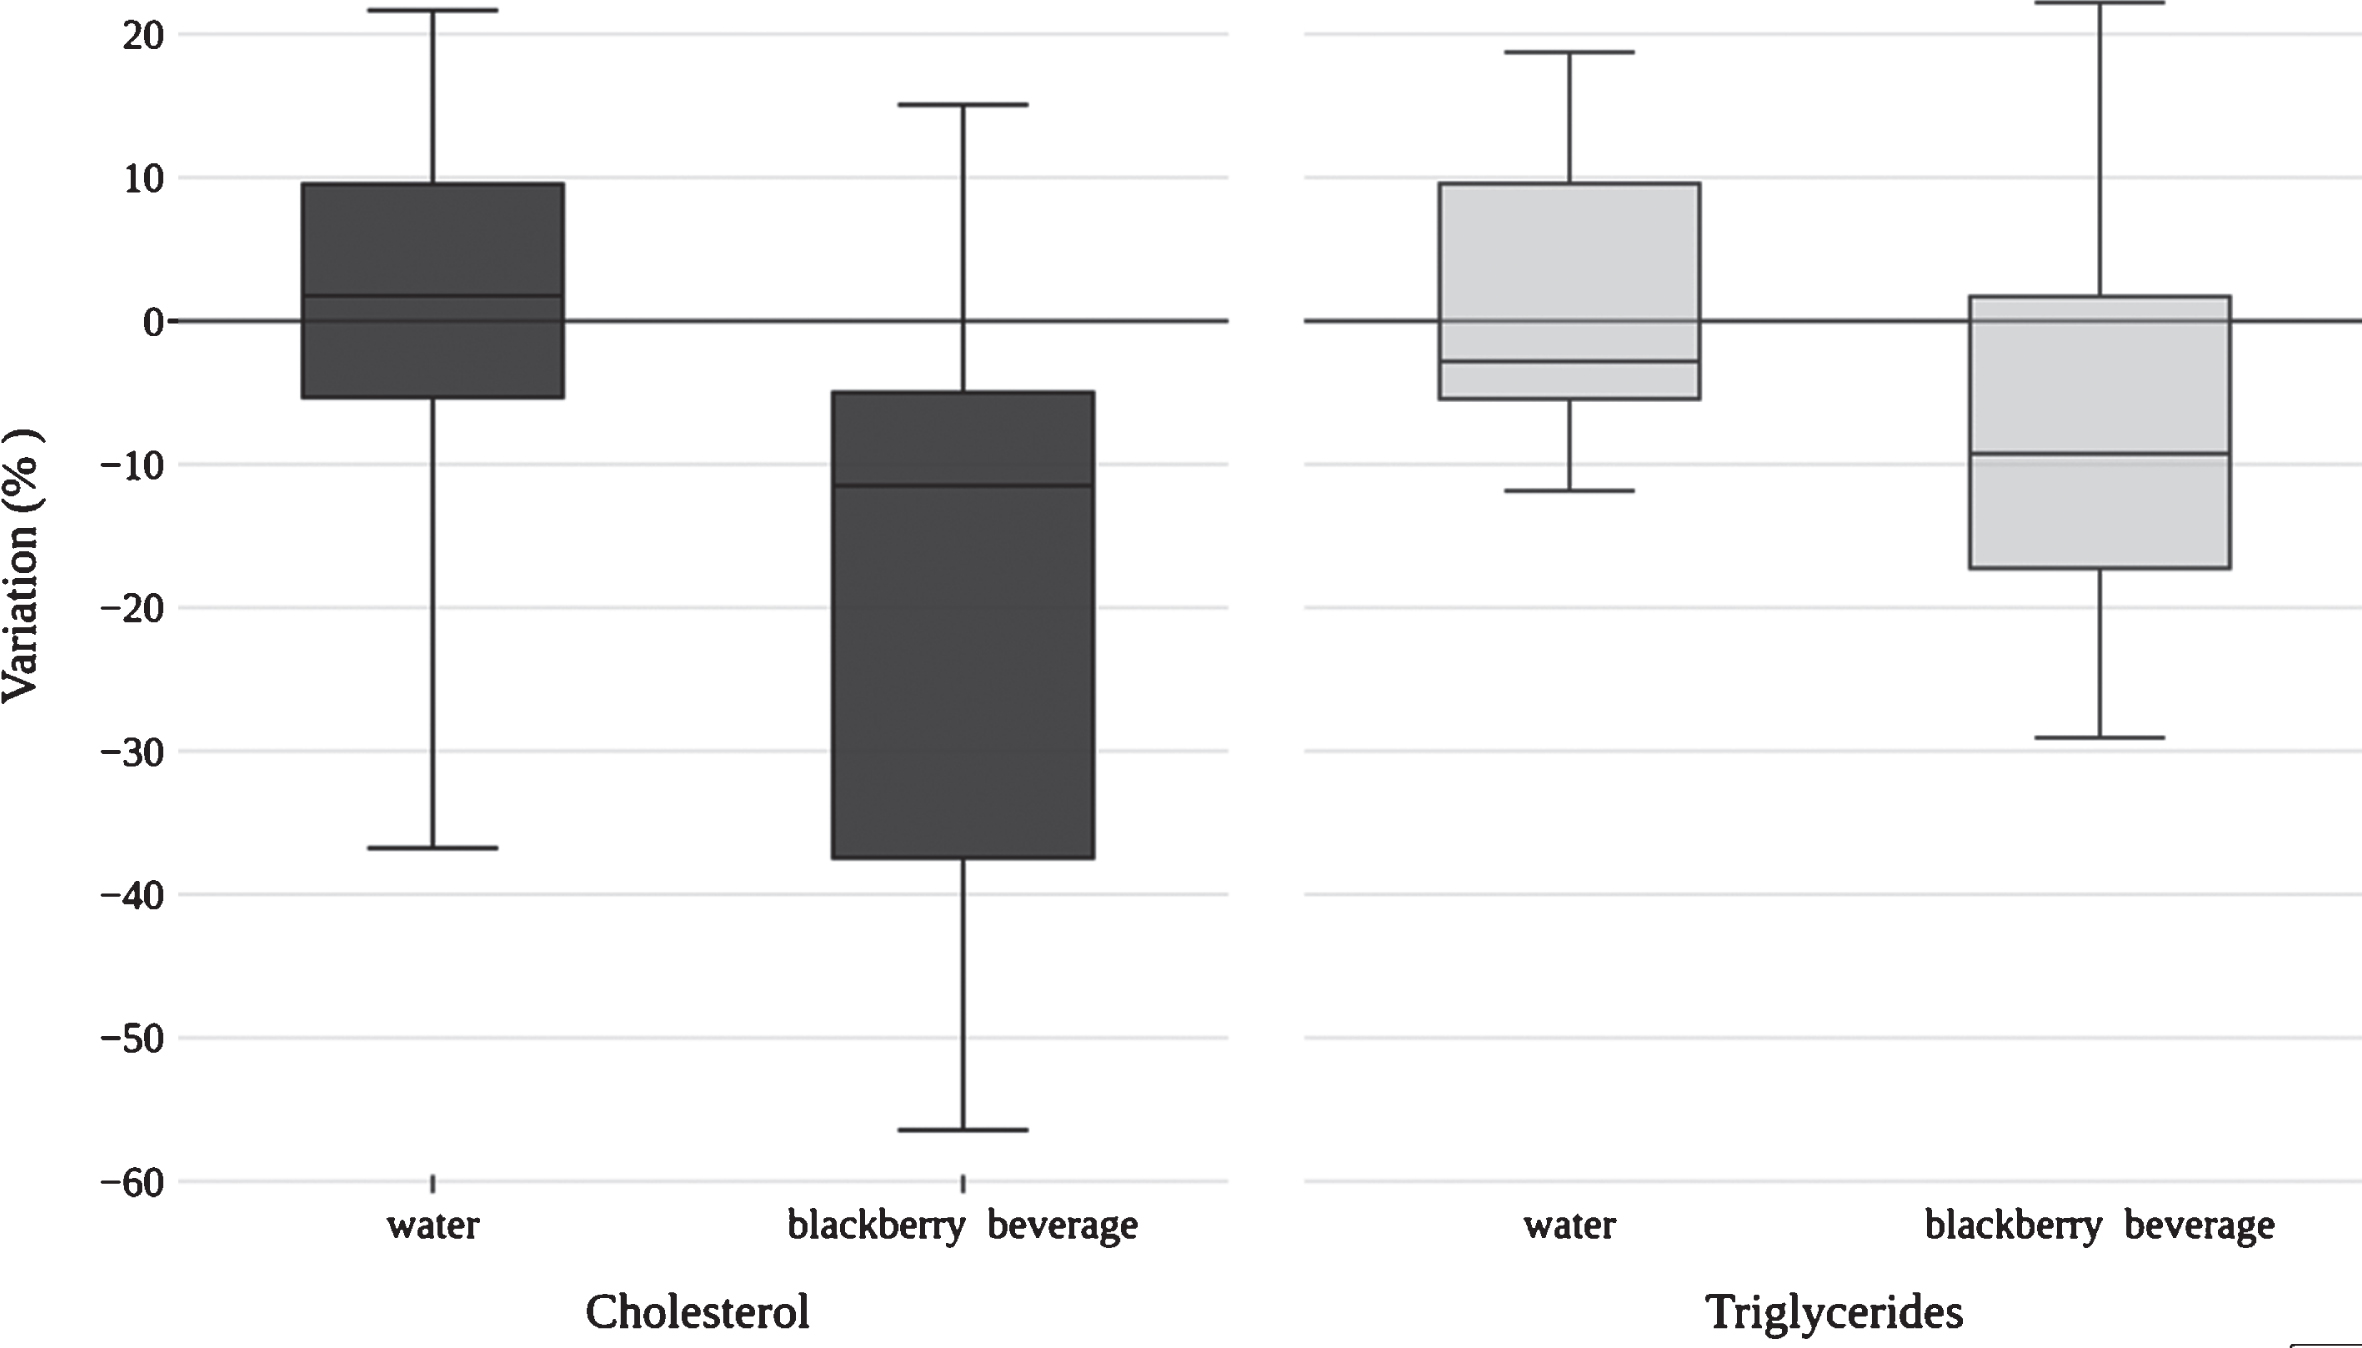 Variation on total cholesterol and triglycerides levels of study participants after drinking blackberry beverage.